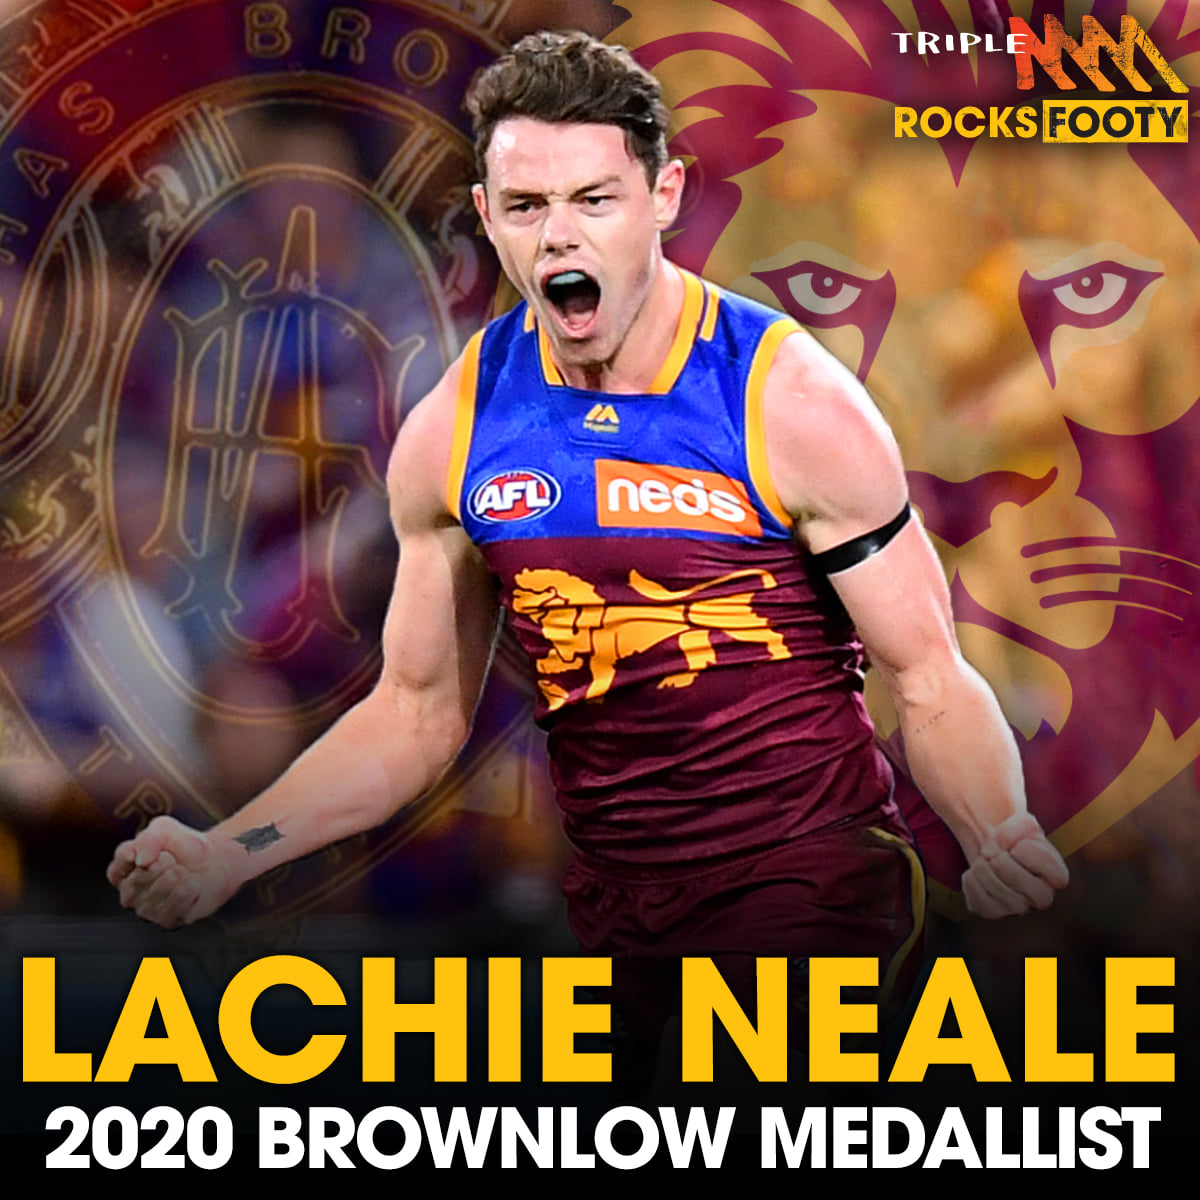 Brownlow Medallist Lachie Neale speak with Triple M after his big win!